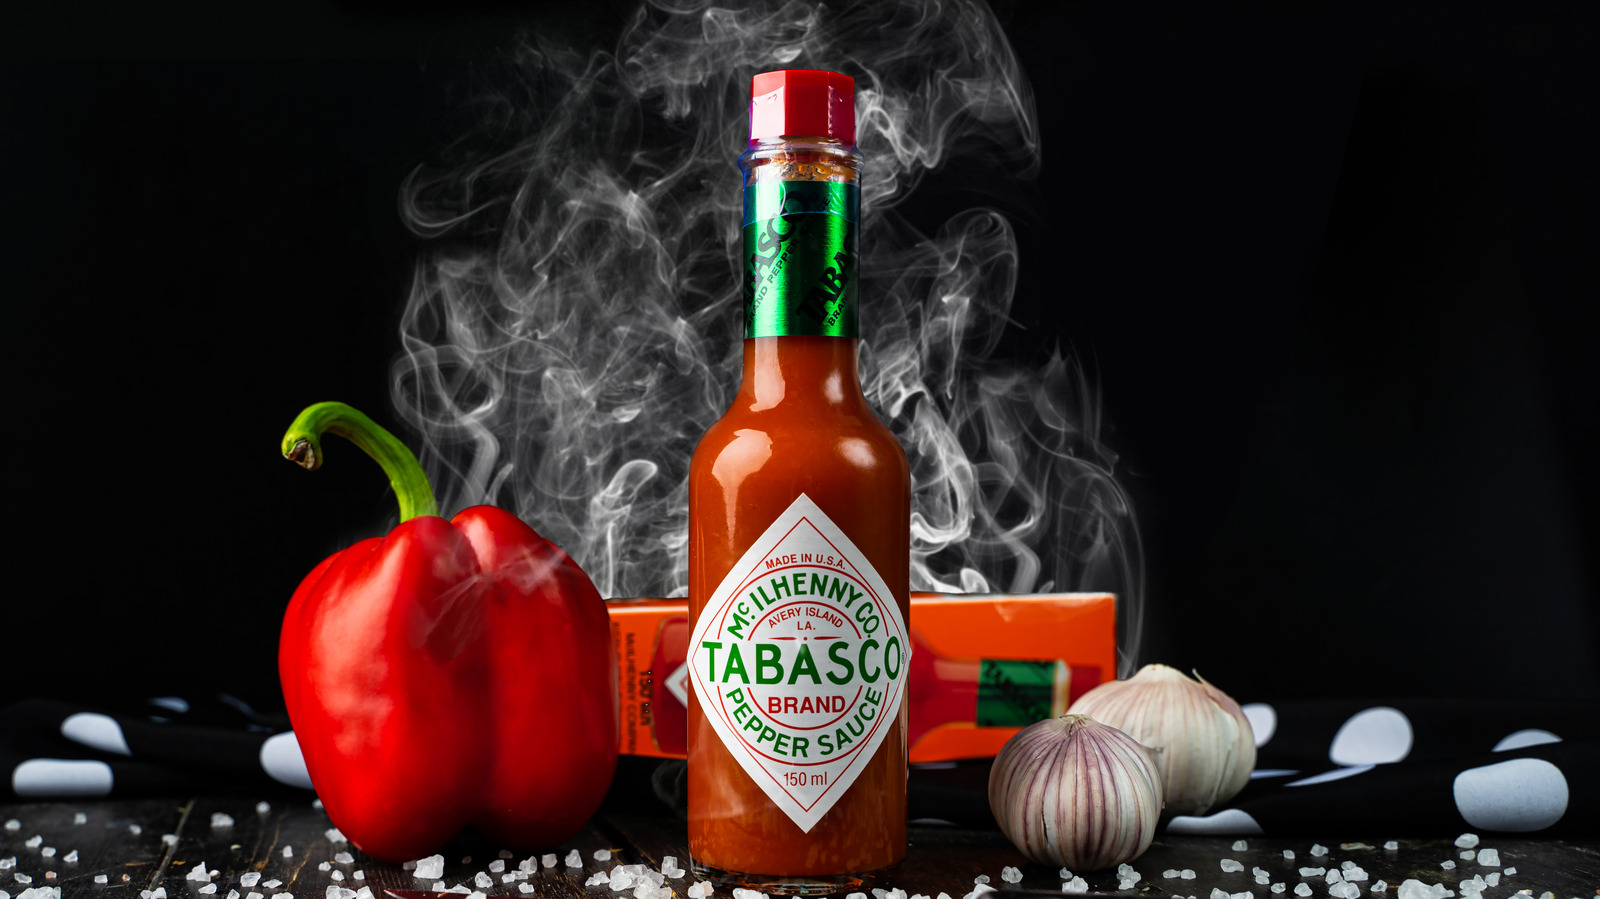 Louisiana Supreme Pepper Sauce with Tabasco Peppers